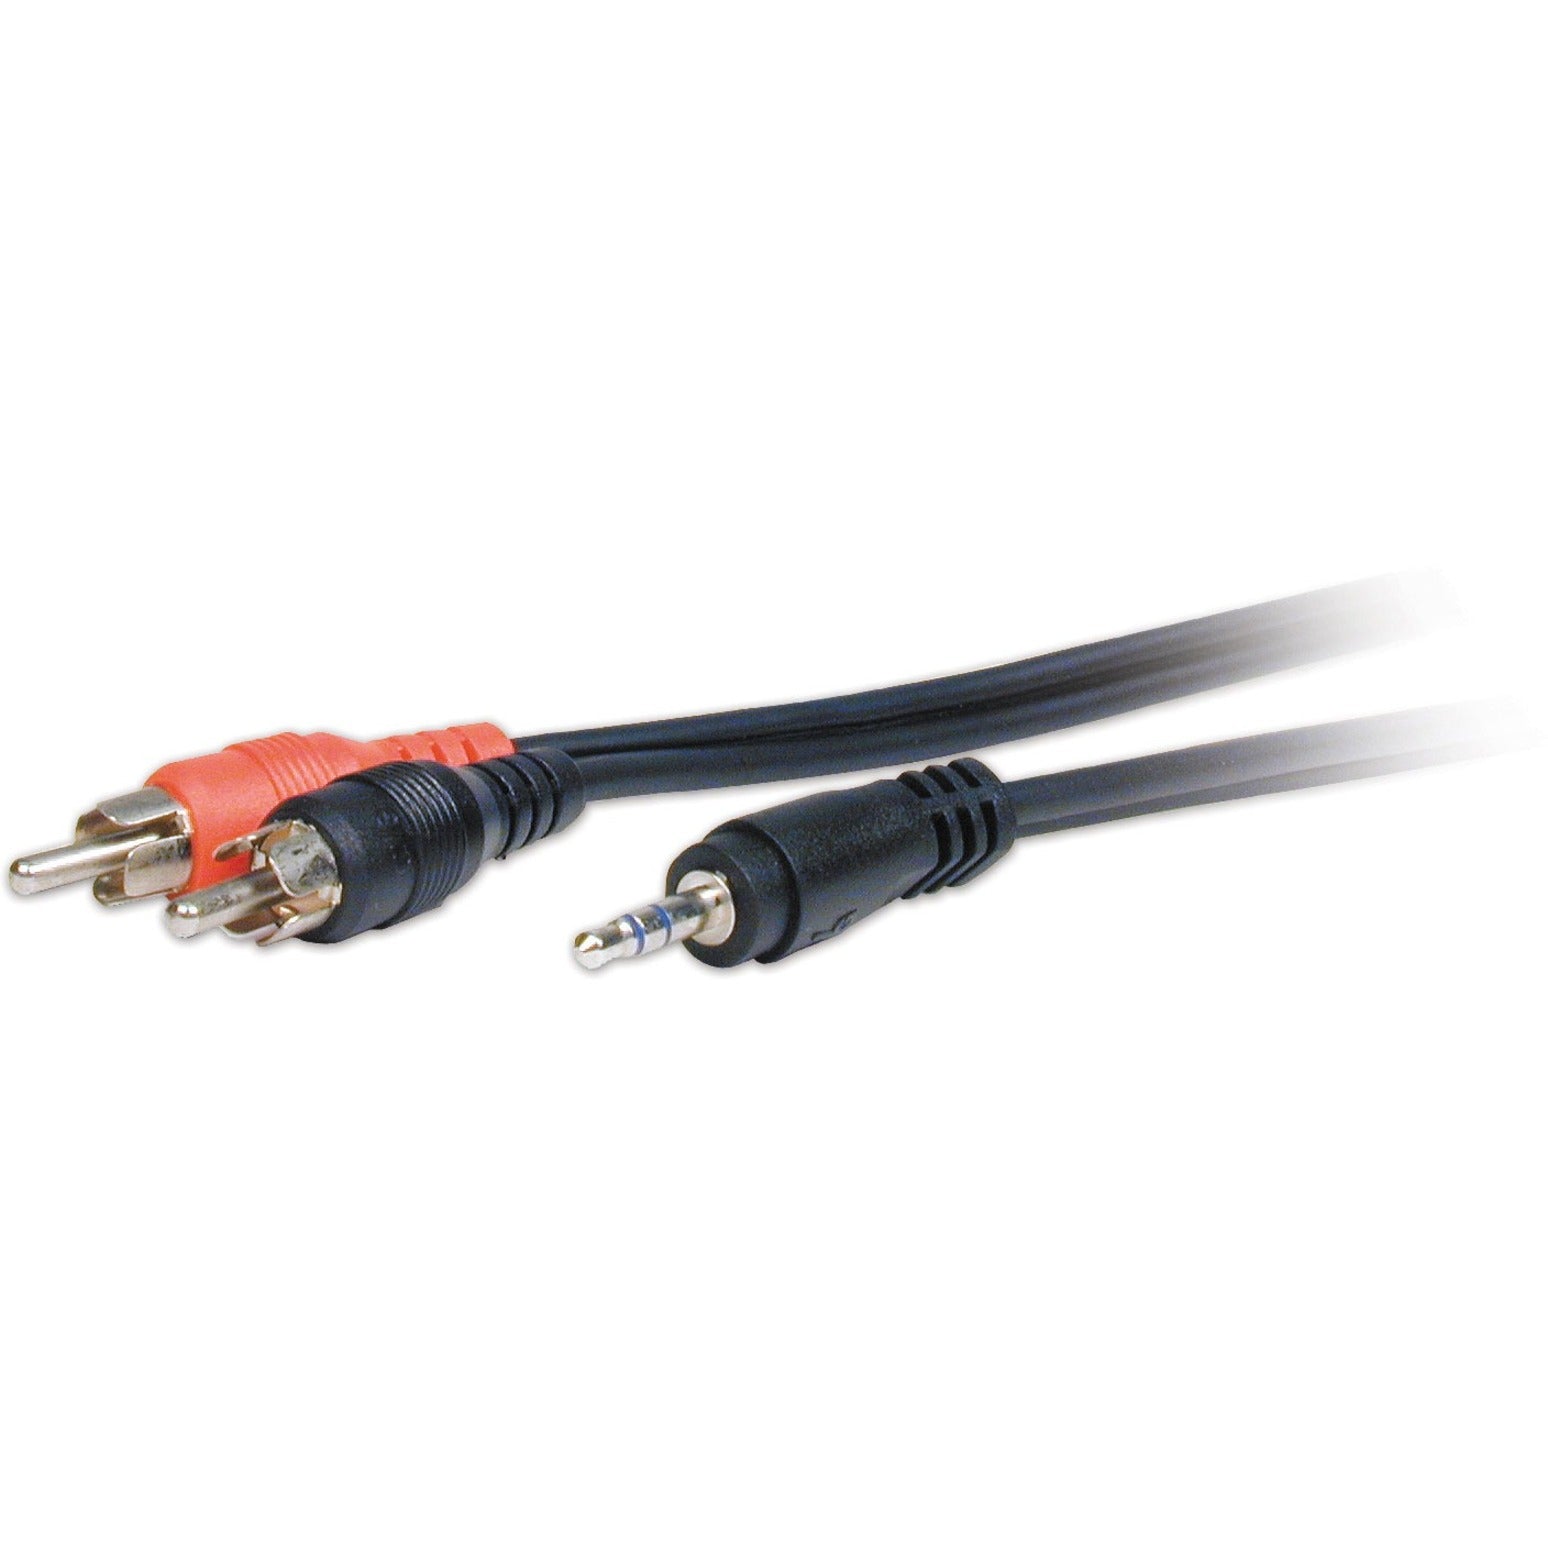 Comprehensive MPS-2PP-25ST Standard Series 3.5mm Stereo Mini Plug to 2 RCA Plugs Audio Cable 25ft, Strain Relief, Molded, Copper Conductor, Shielded, Xtraflex Jacket